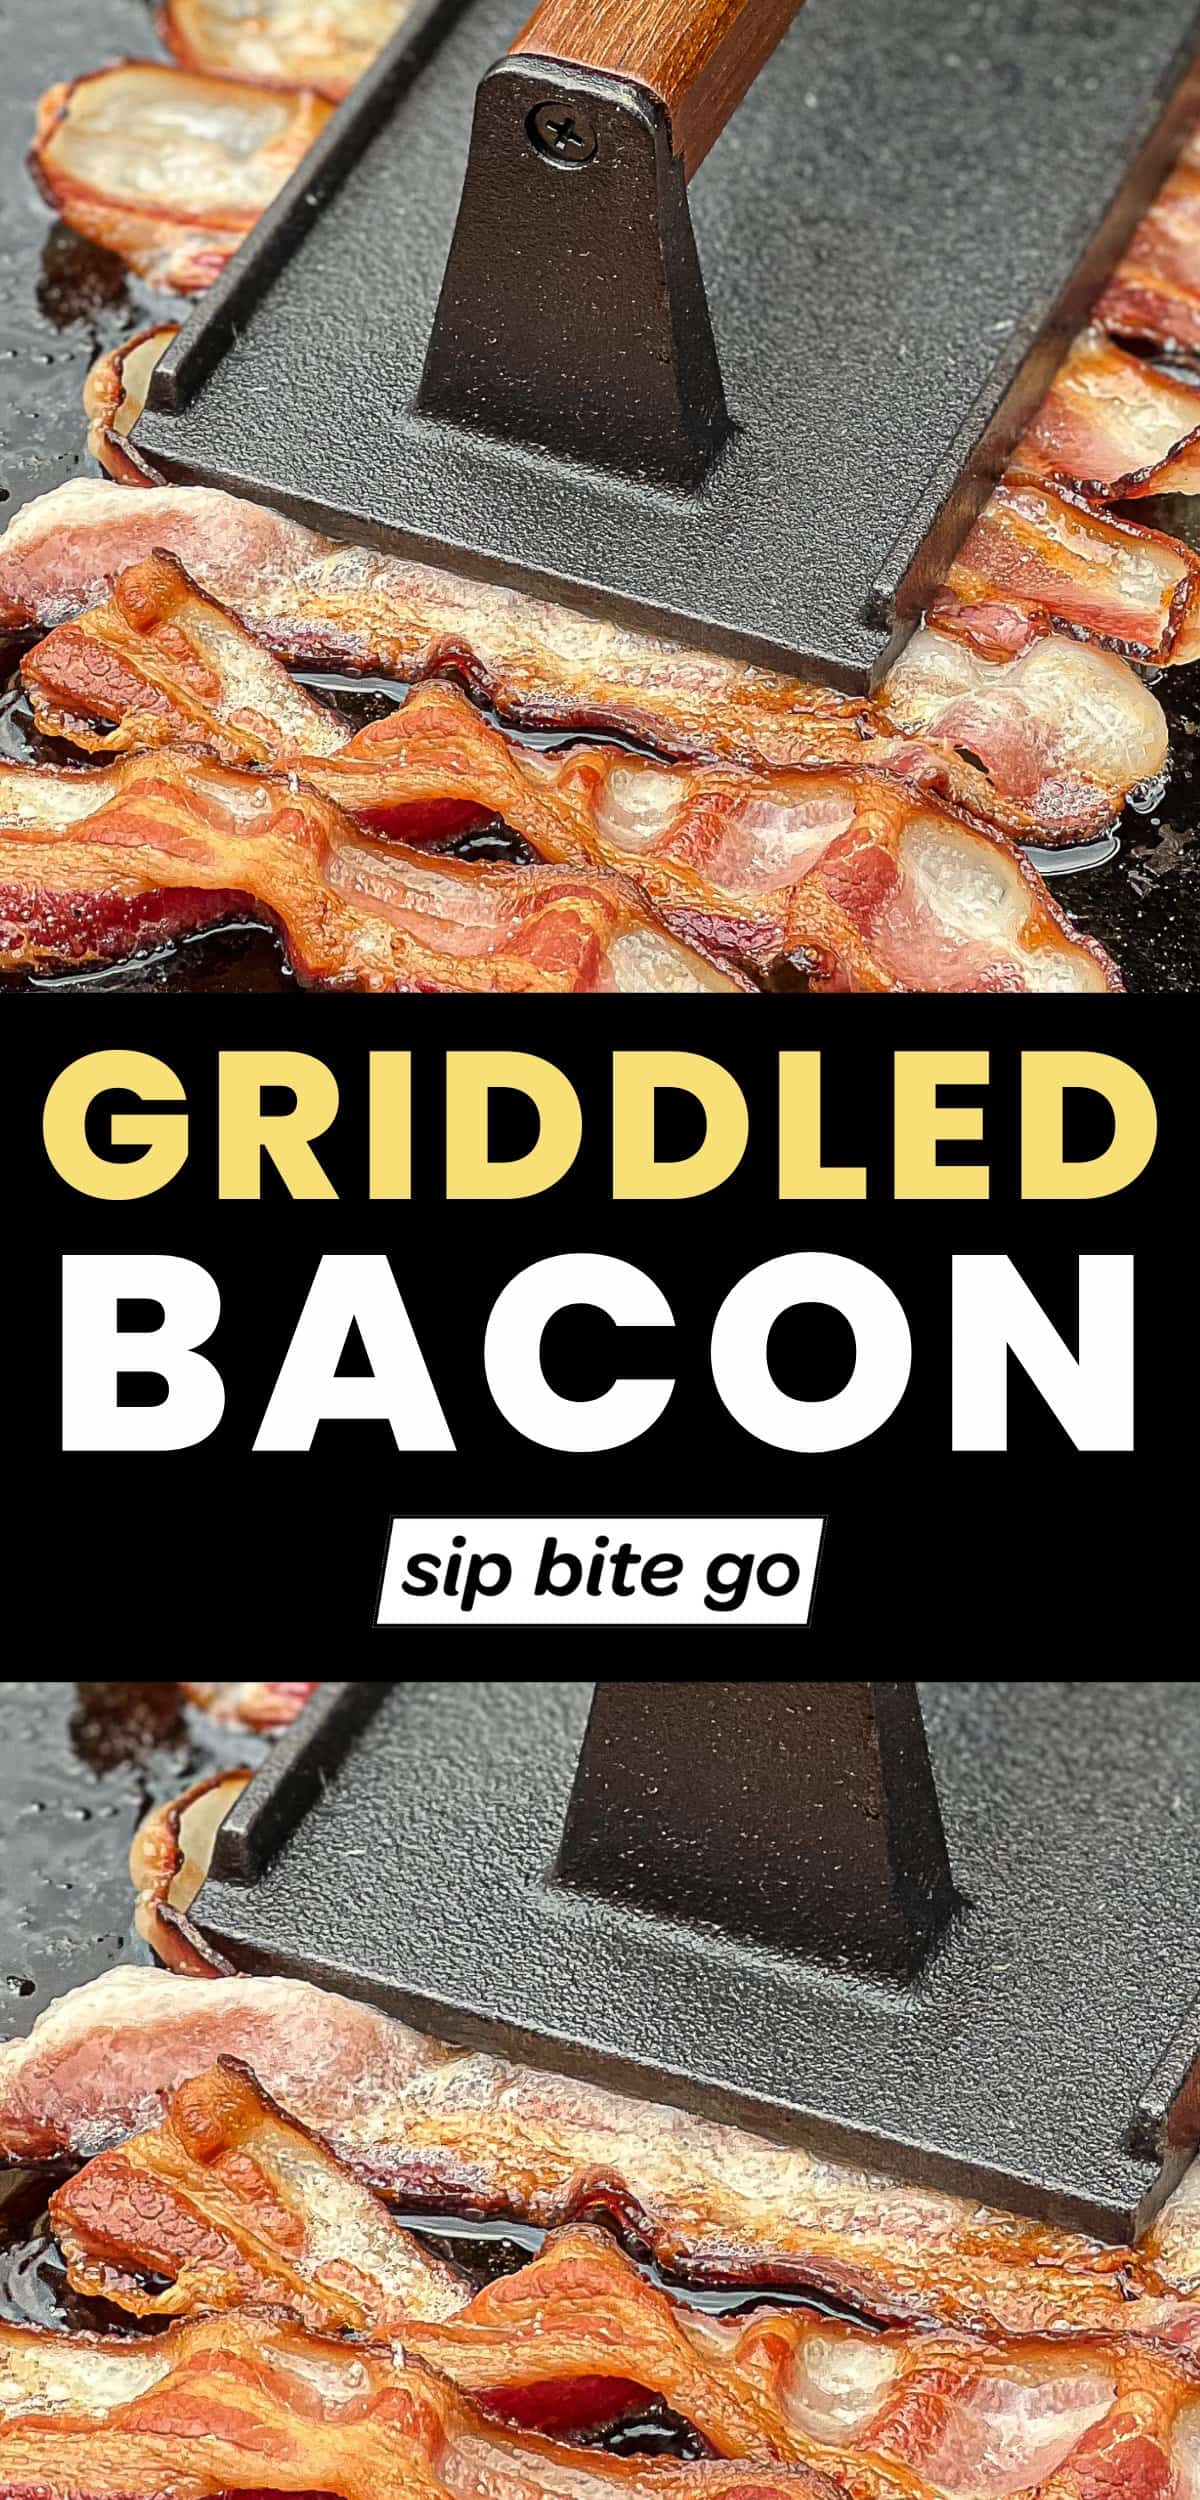 Griddled Bacon Recipe images on Traeger Flatrock Griddle with text overlay and Sip Bite Go logo